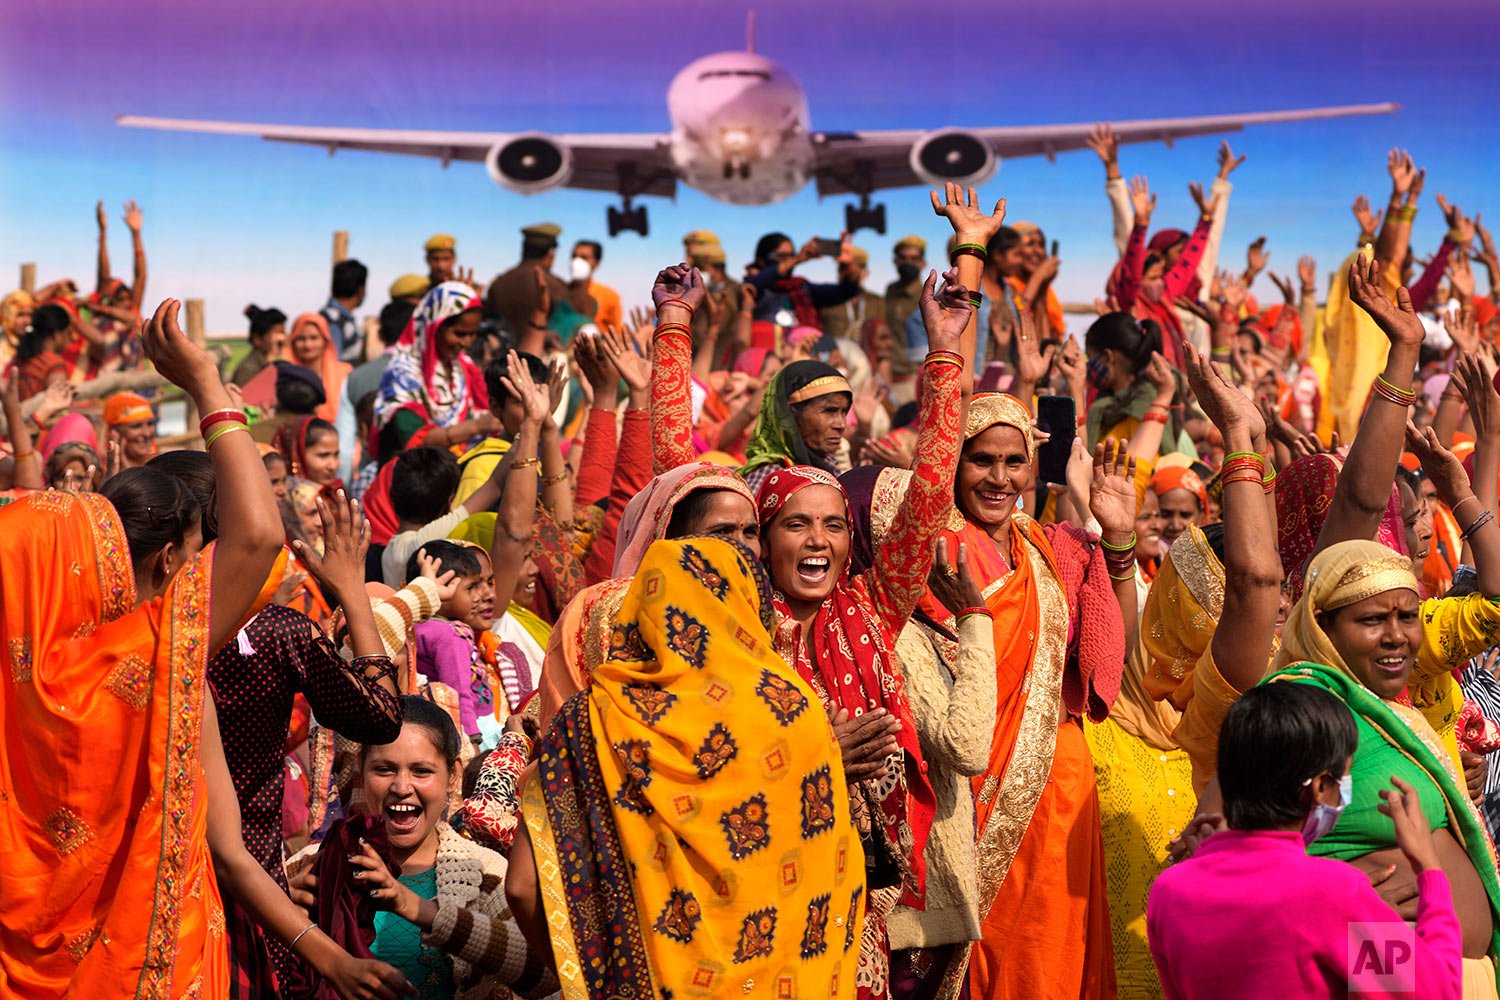  Women dance and shout slogans as they wait for the arrival of Indian prime minister Narendra Modi for the foundation laying ceremony of an international airport in Jewar, about 100 kilometers (62 miles) from New Delhi, India, Thursday, Nov. 25, 2021